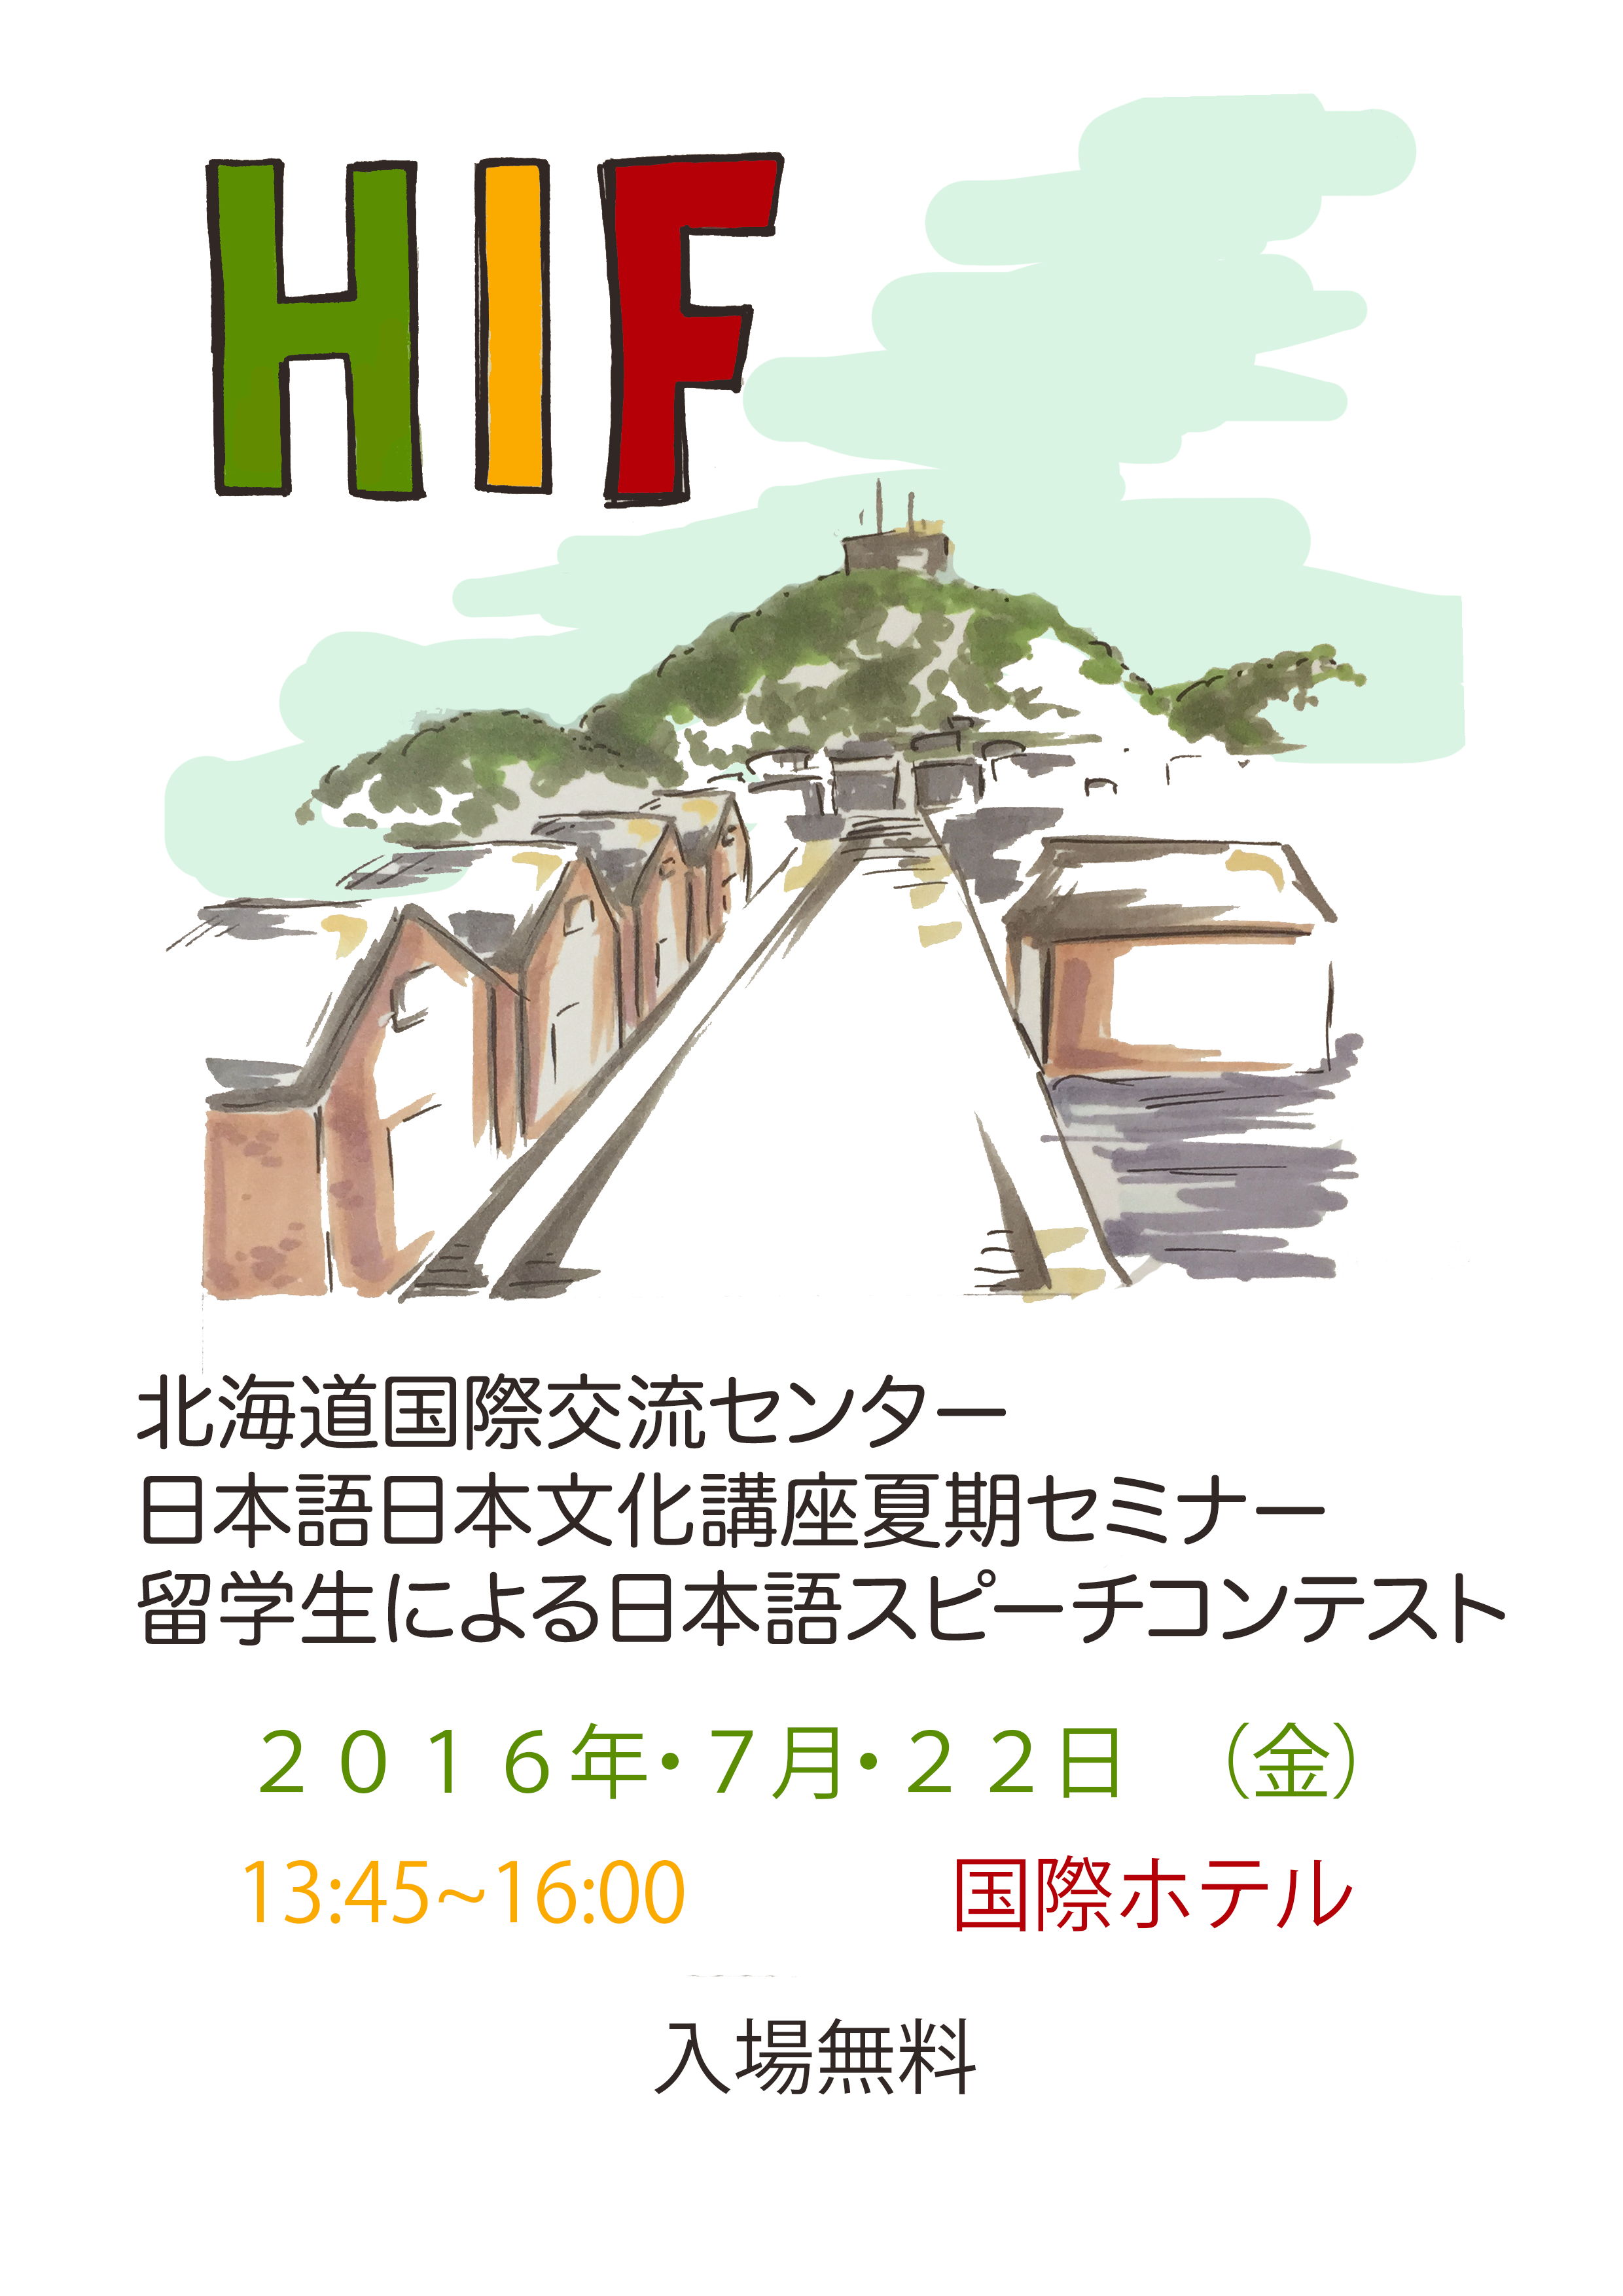 http://www.hif.or.jp/D%E7%B5%84%E3%83%A9%E3%82%BB%E3%83%83%E3%82%AF%E4%BD%9C.png